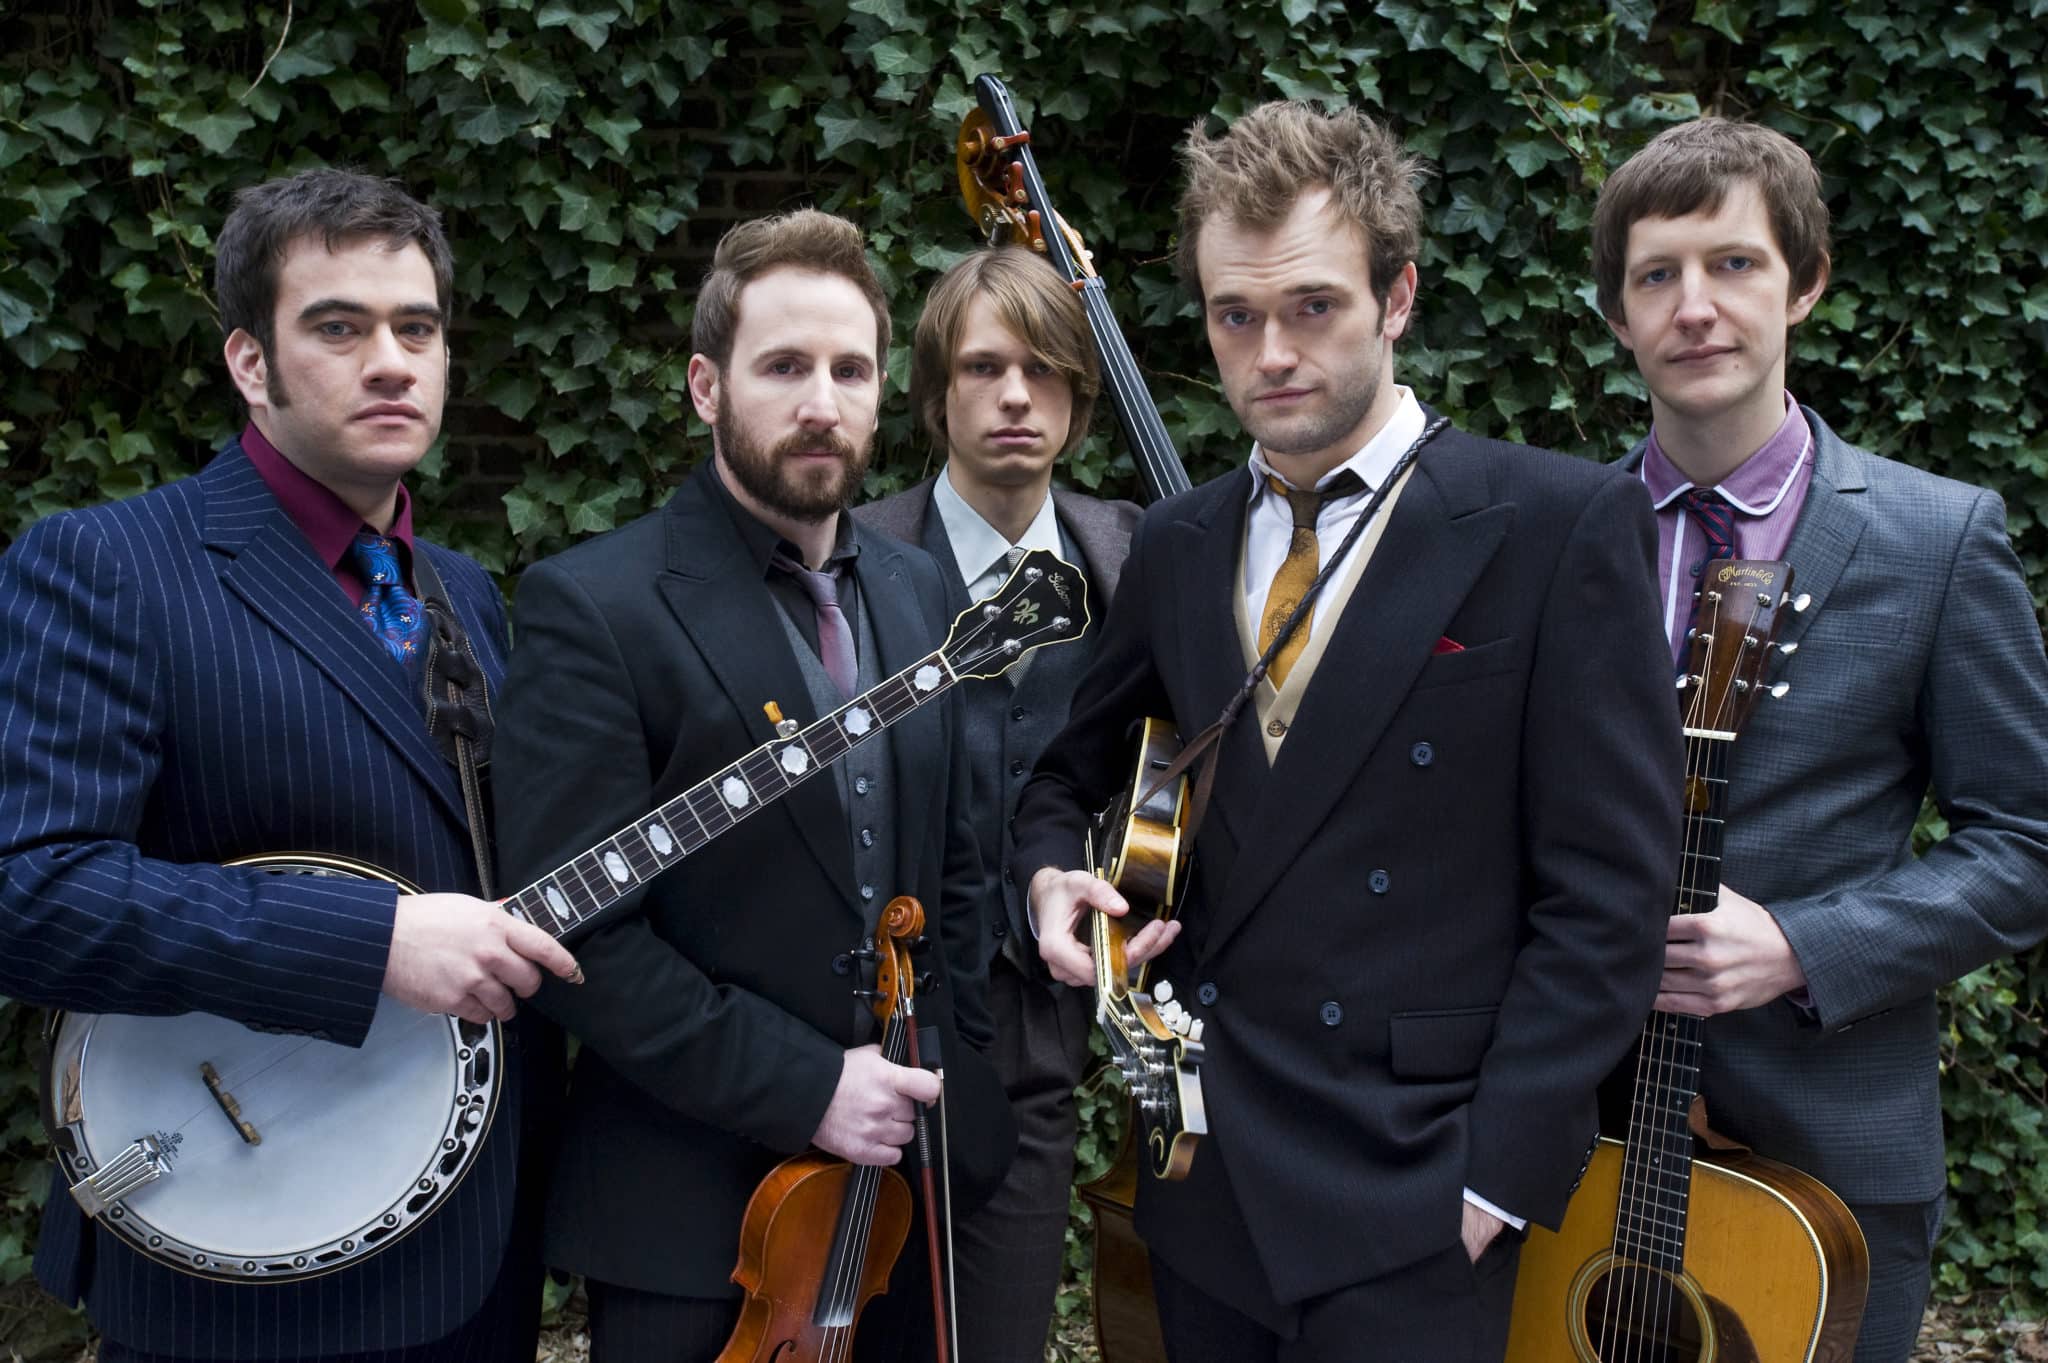 The Punch Brothers play at 8 p.m. Saturday, March 28 in Harrah's Lake Tahoe.